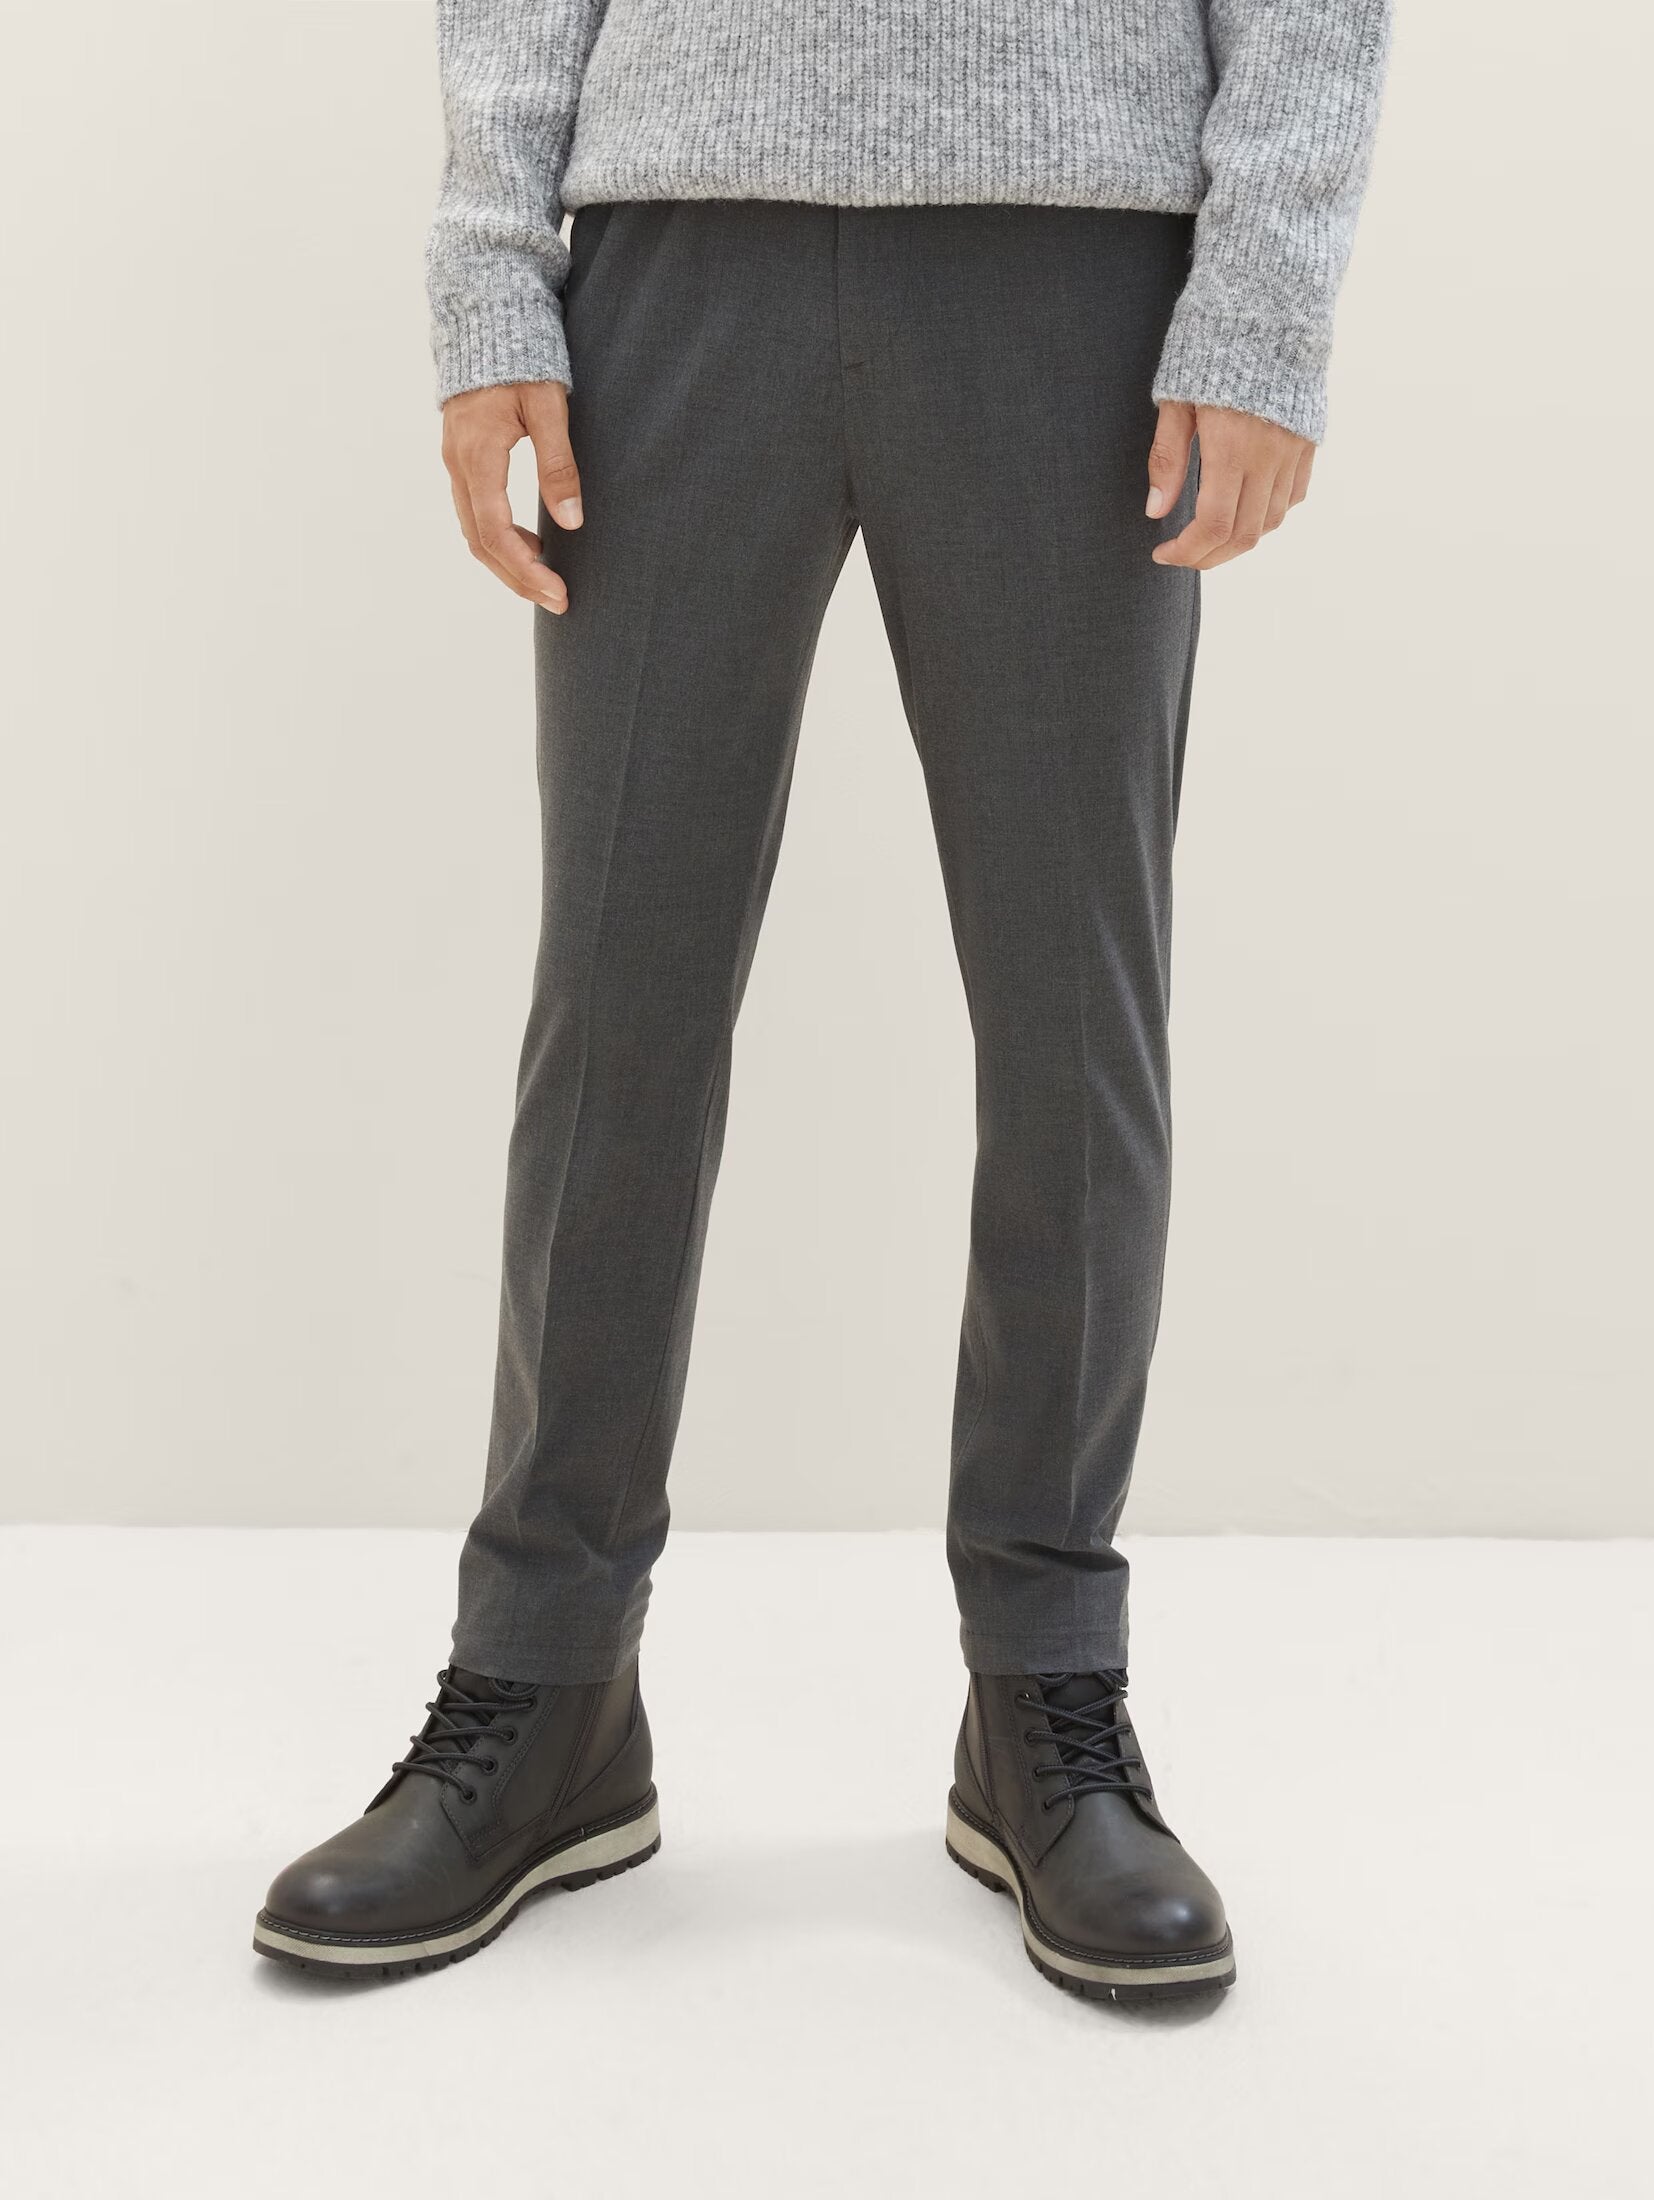 Tom Tailor Relaxed Tapered Mid Grey Melange Chinos